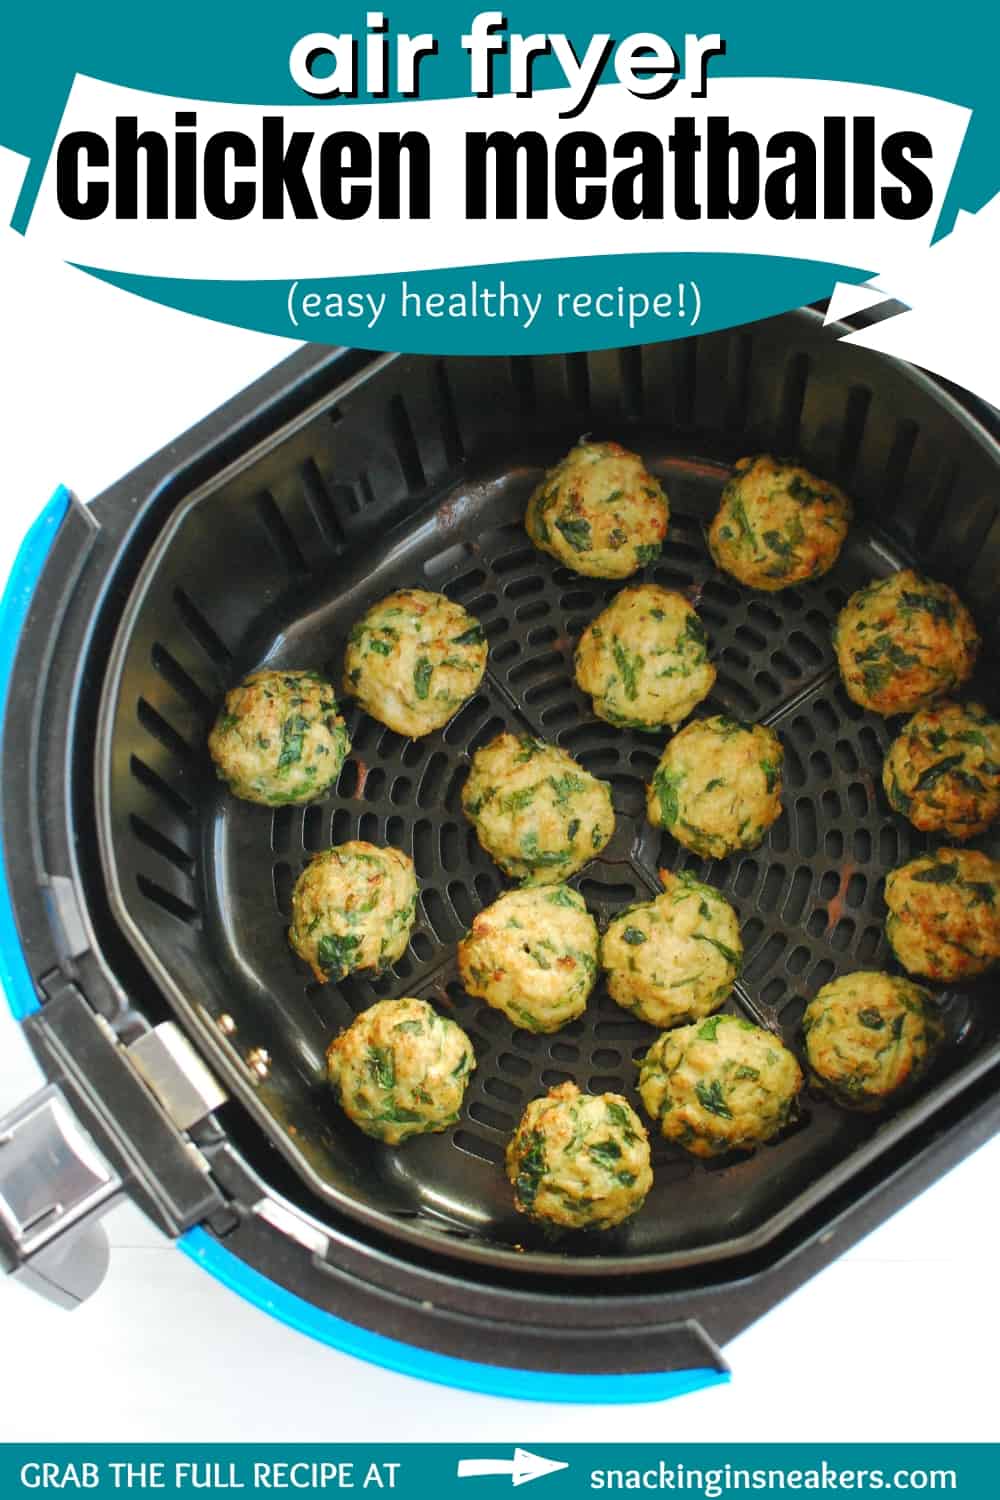 Air fryer chicken meatballs in the air fryer basket with a text overlay with the recipe name.